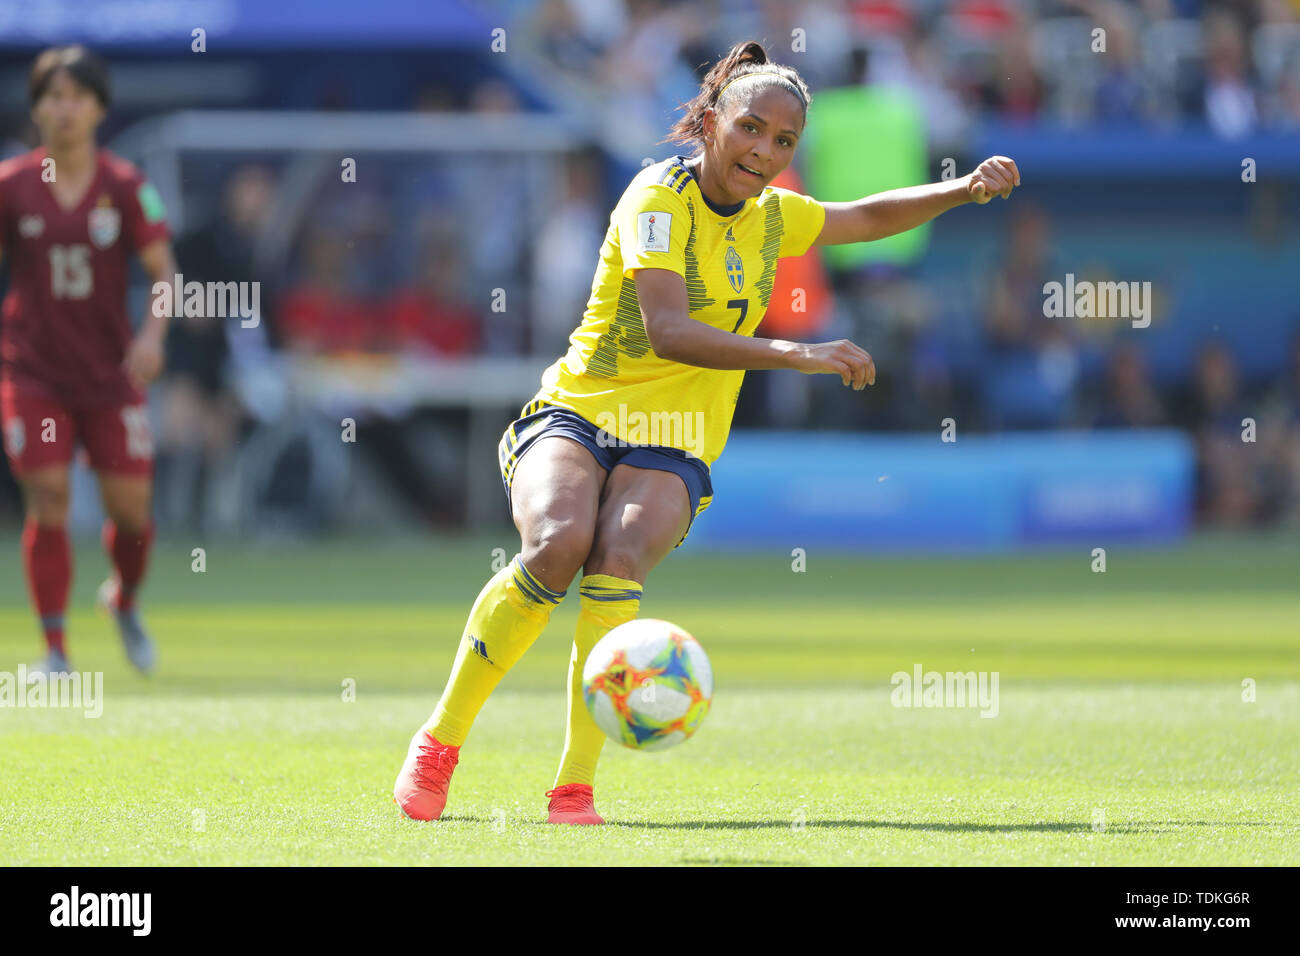 Nice, France. 16th June, 2019. Madelen Janogy (SWE) Football/Soccer : Madelen Janogy of Sweden kicks the ball during the FIFA Women's World Cup France 2019 group F match between Sweden and Thailand at Stade de Nice in Nice, France . Credit: AFLO/Alamy Live News Stock Photo